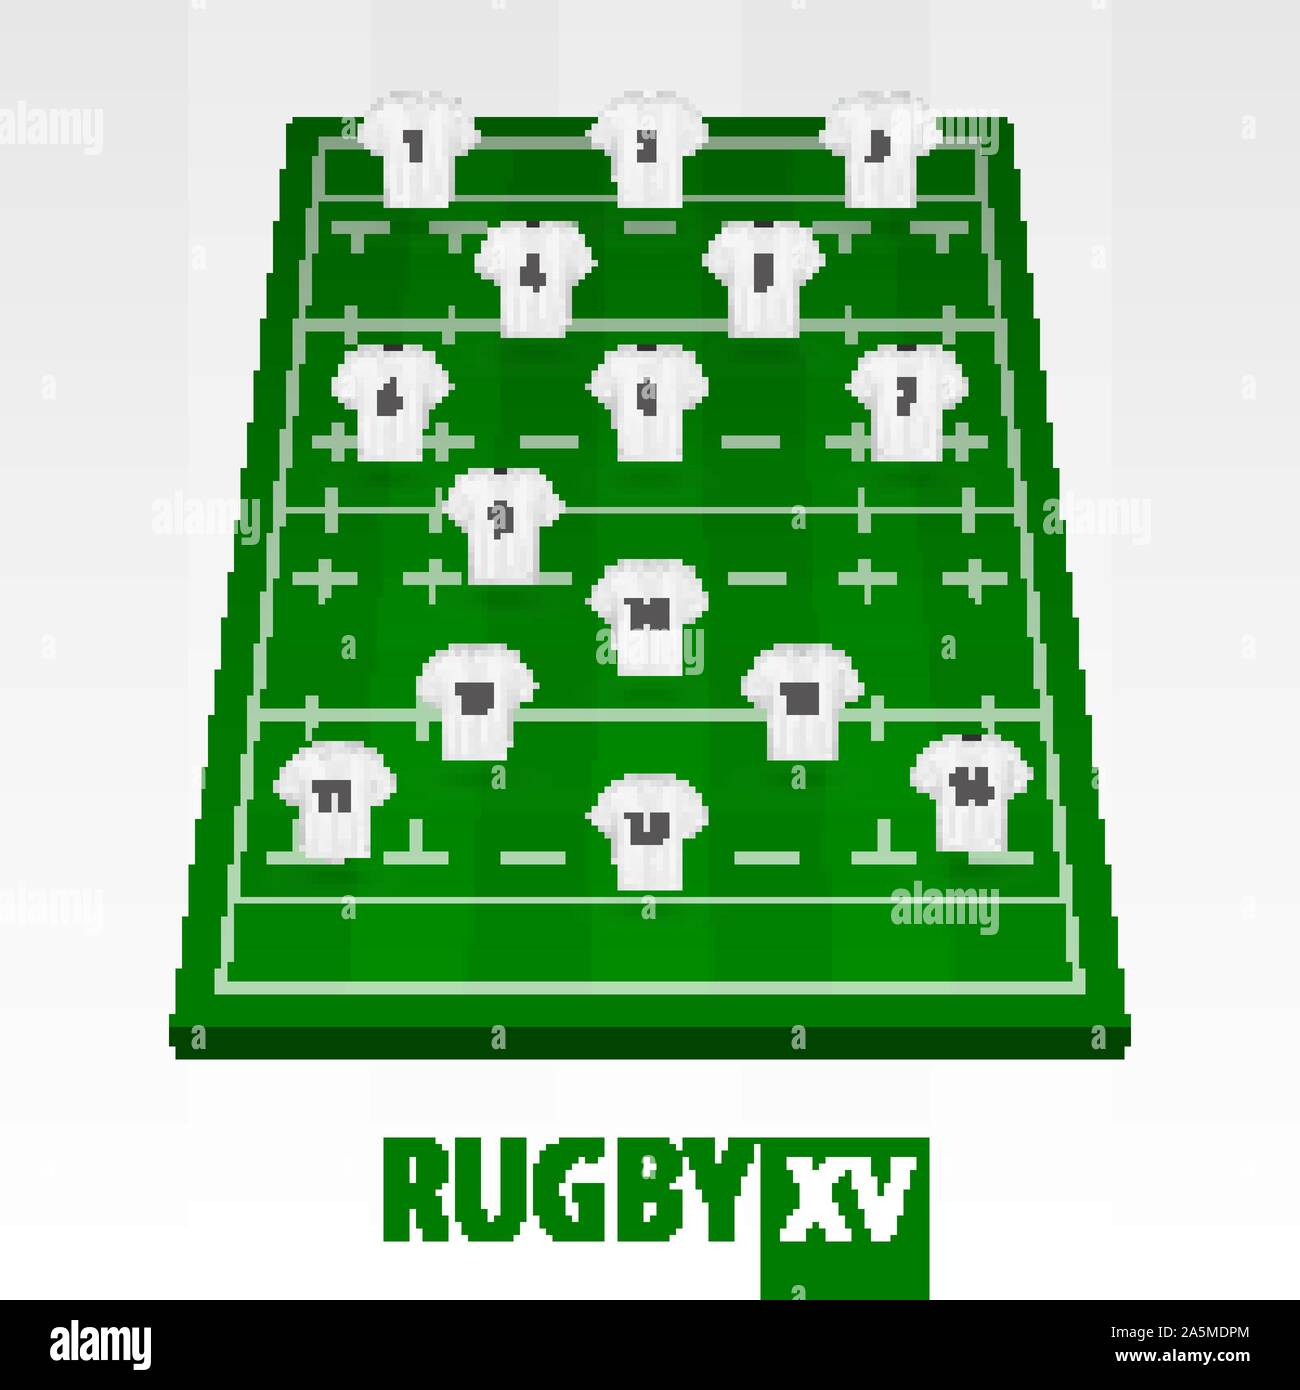 Rugby Field With Player Position Green Rugby 15 Field Vector Illustration 2A5MDPM 